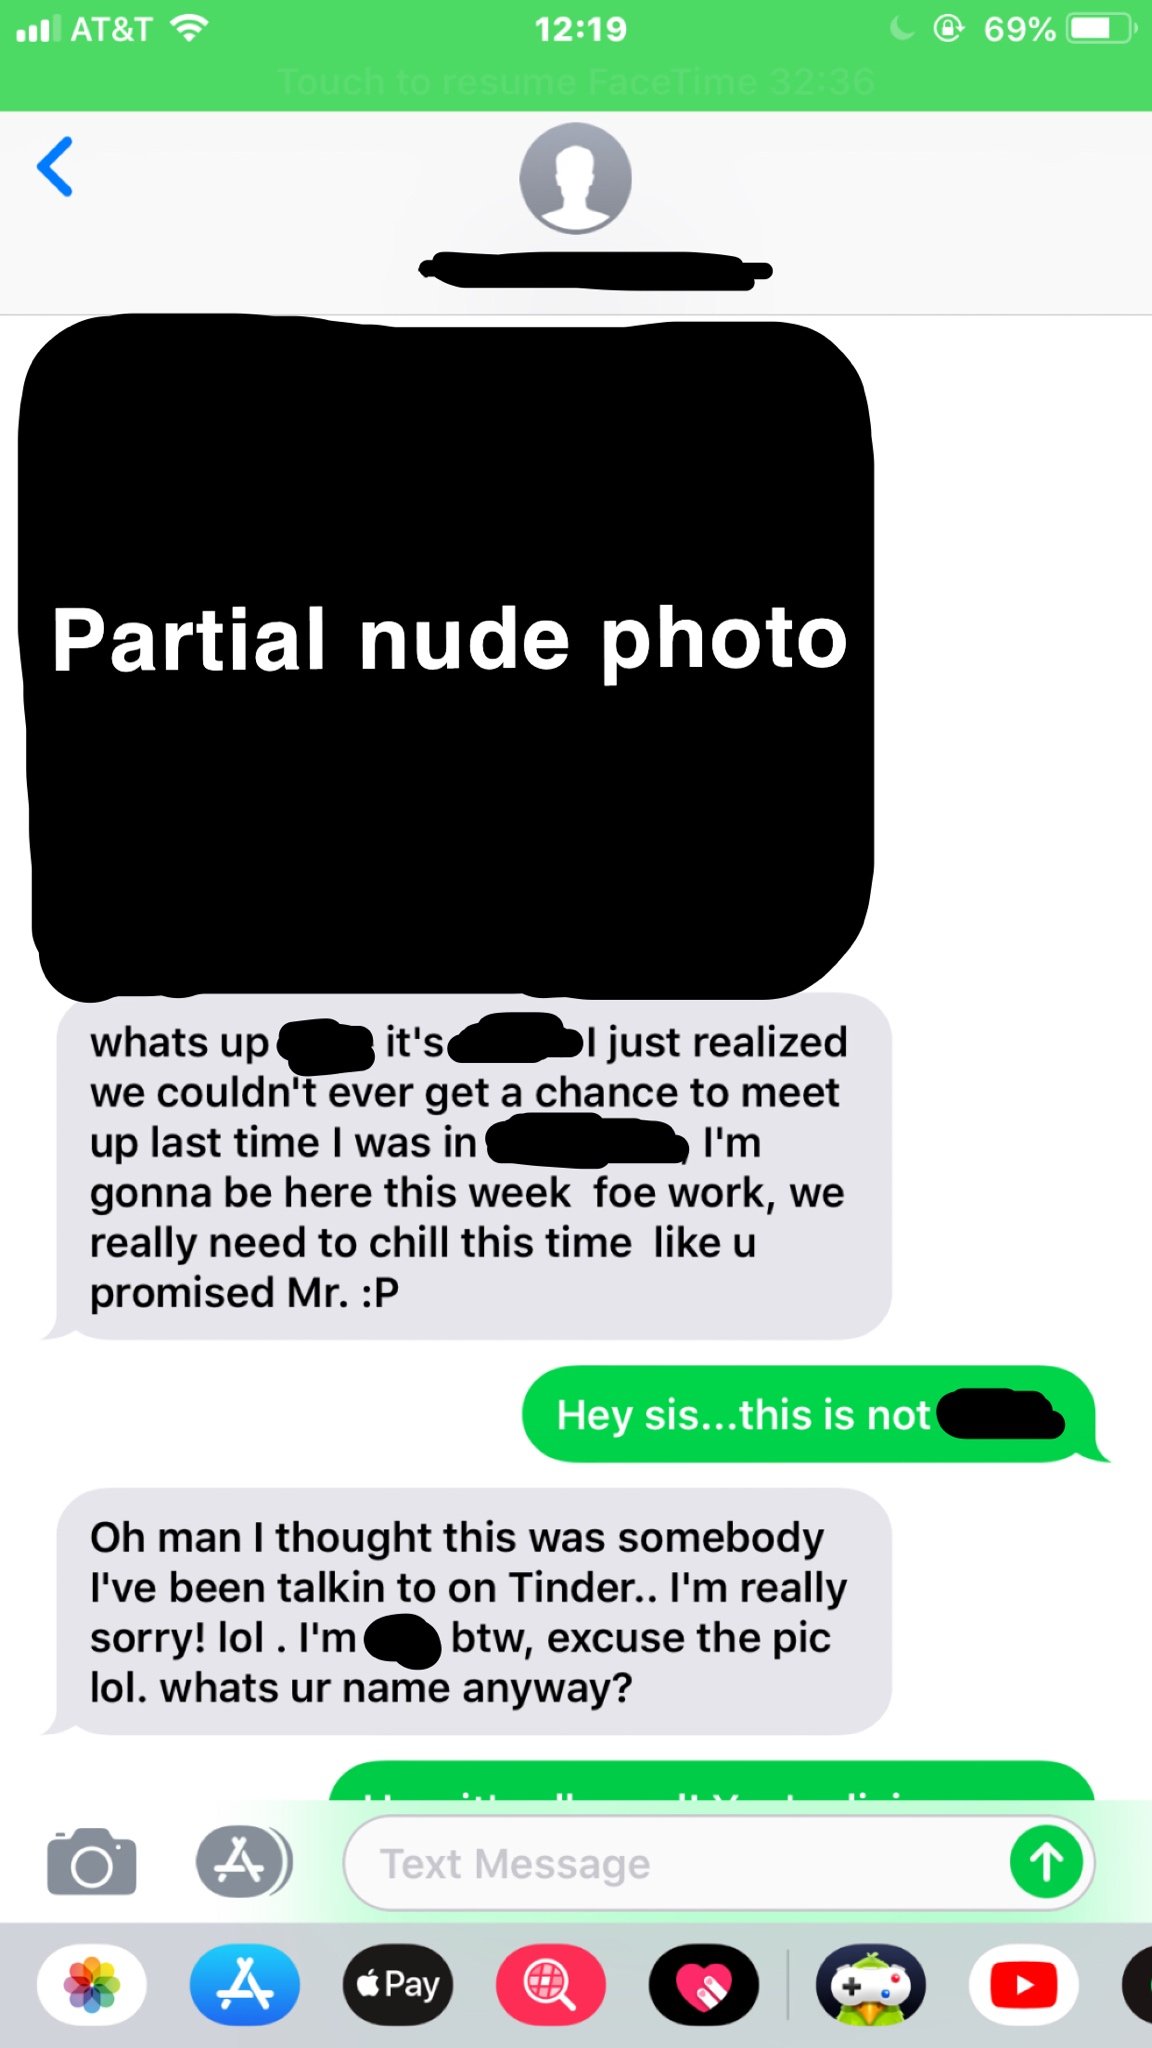 wrong number . At&T @ 69% Partial nude photo whats up it's bi just realized we couldn't ever get a chance to meet up last time I was in I'm gonna be here this week foe work, we really need to chill this time u promised Mr. P Hey sis...this is not Oh man I